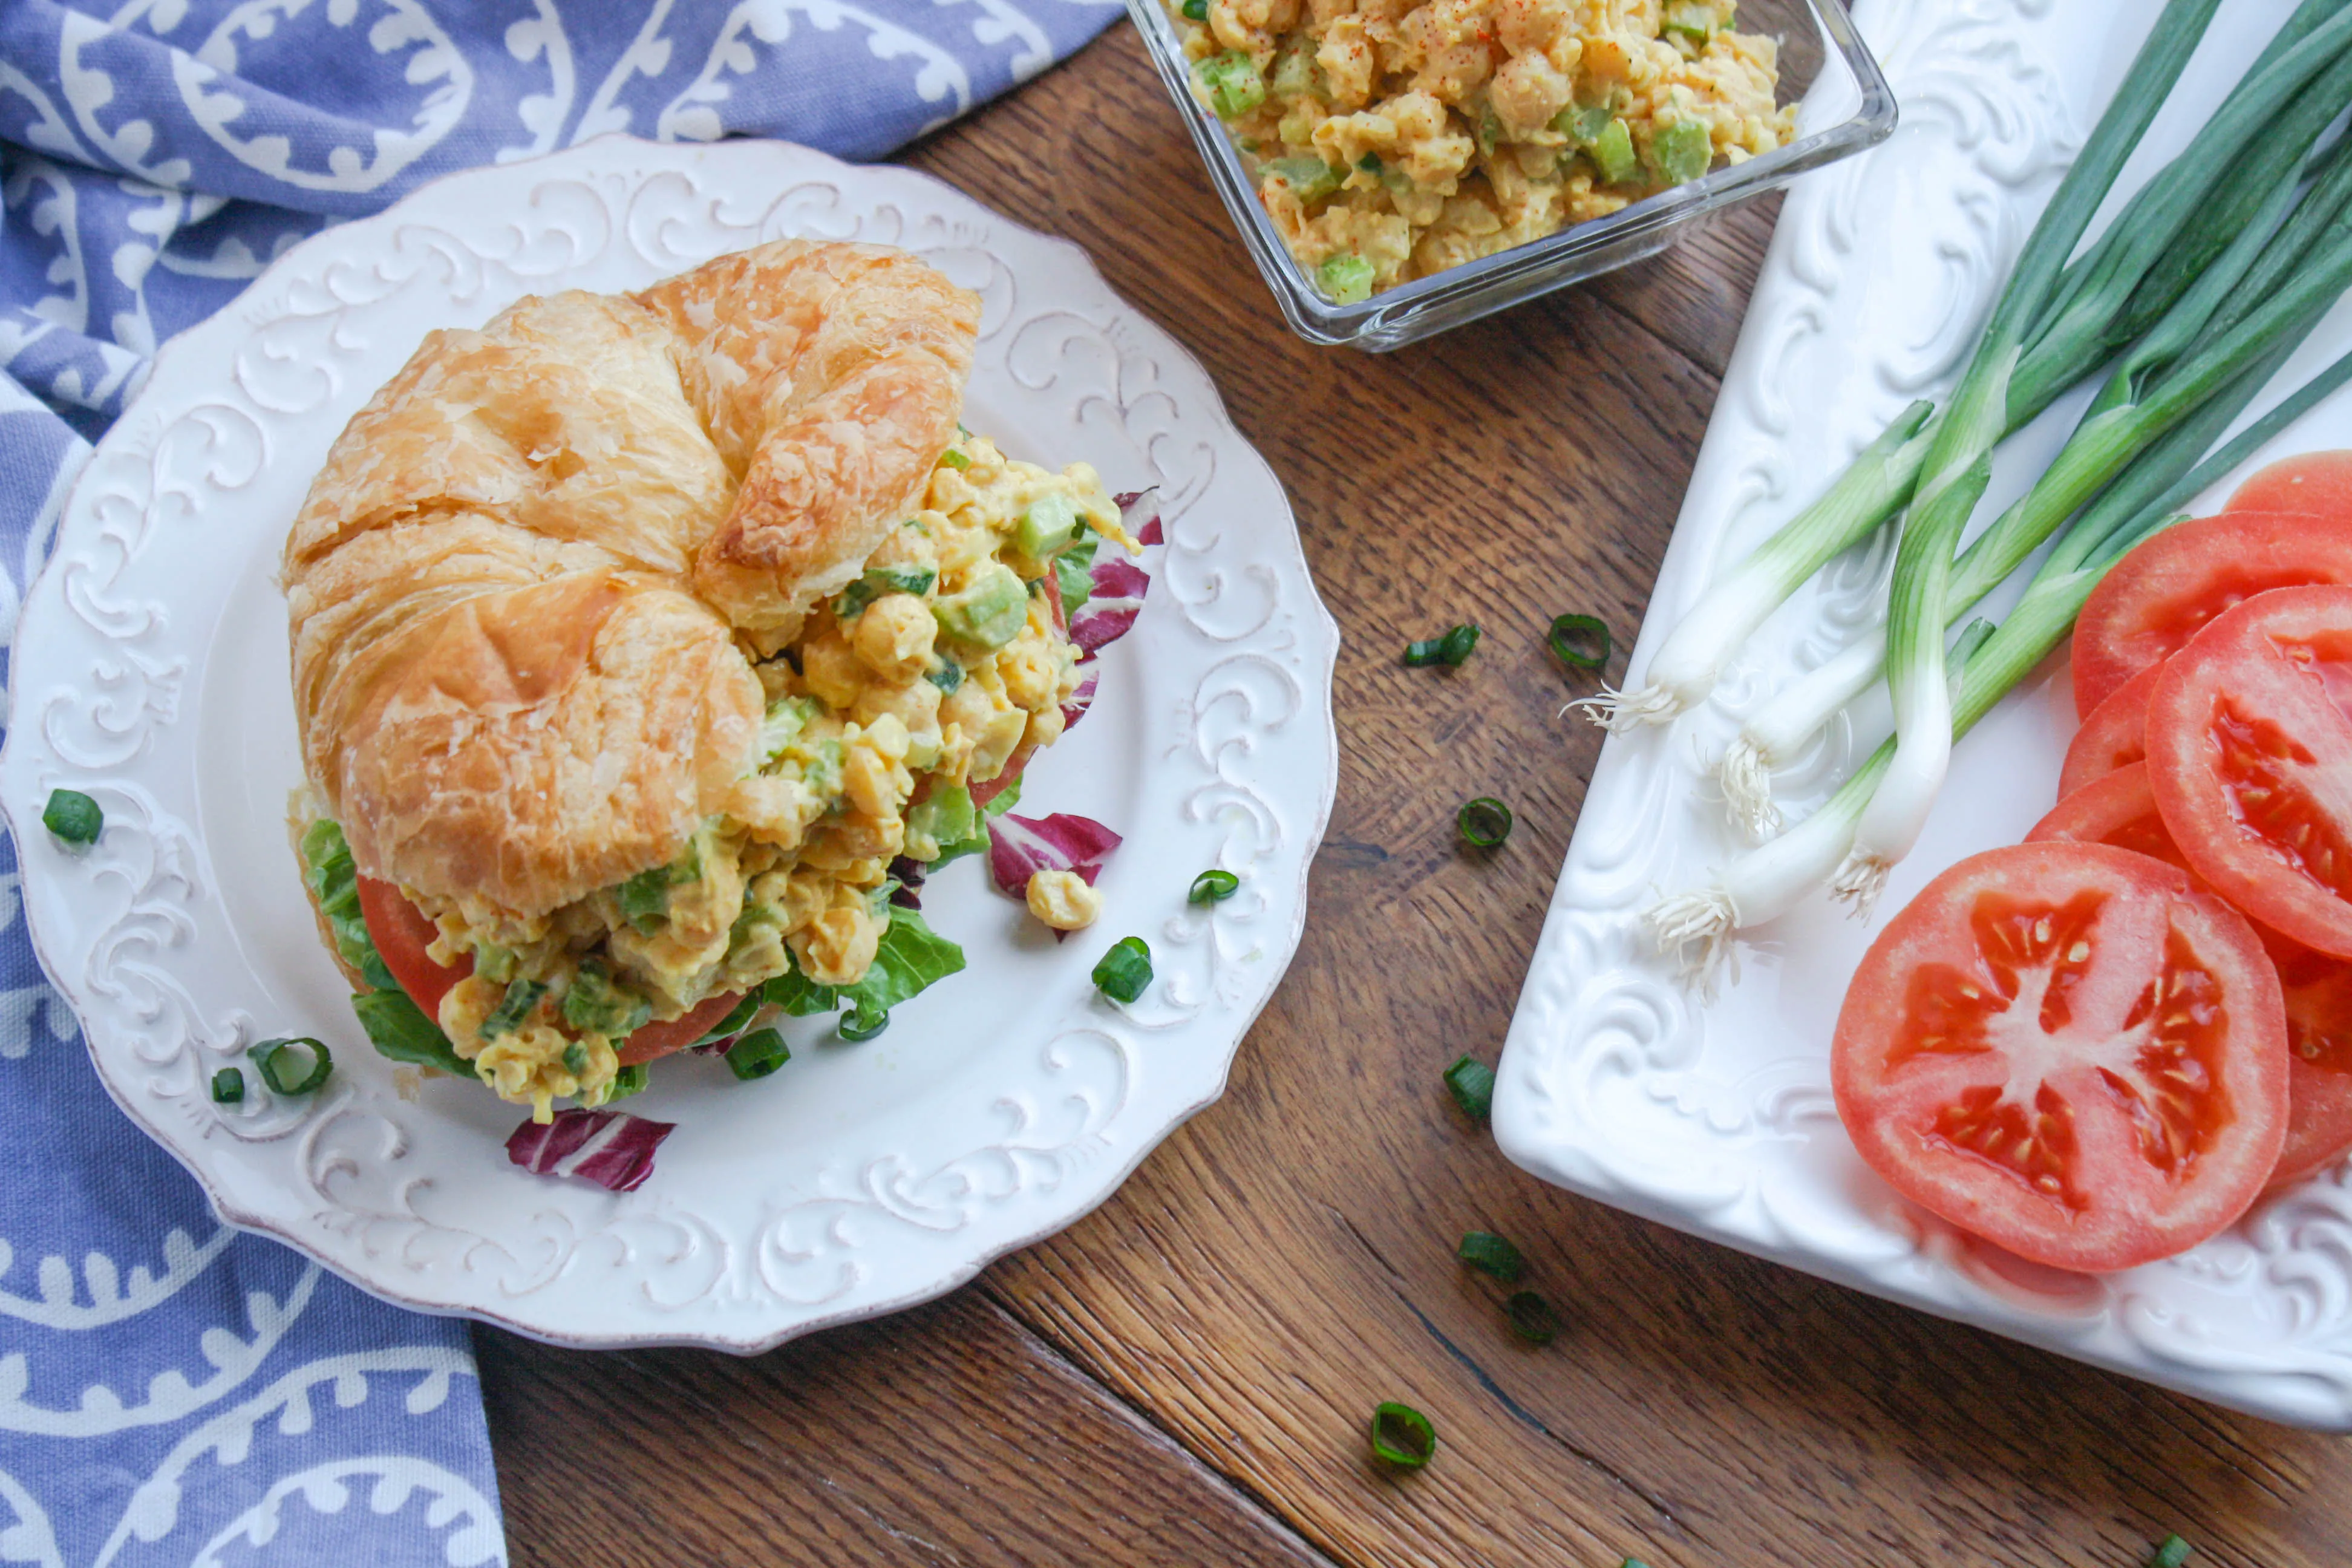 Chickpea Salad Sandwiches are a tasty option for any meal. This vegetarian sandwich is filling and flavorful!